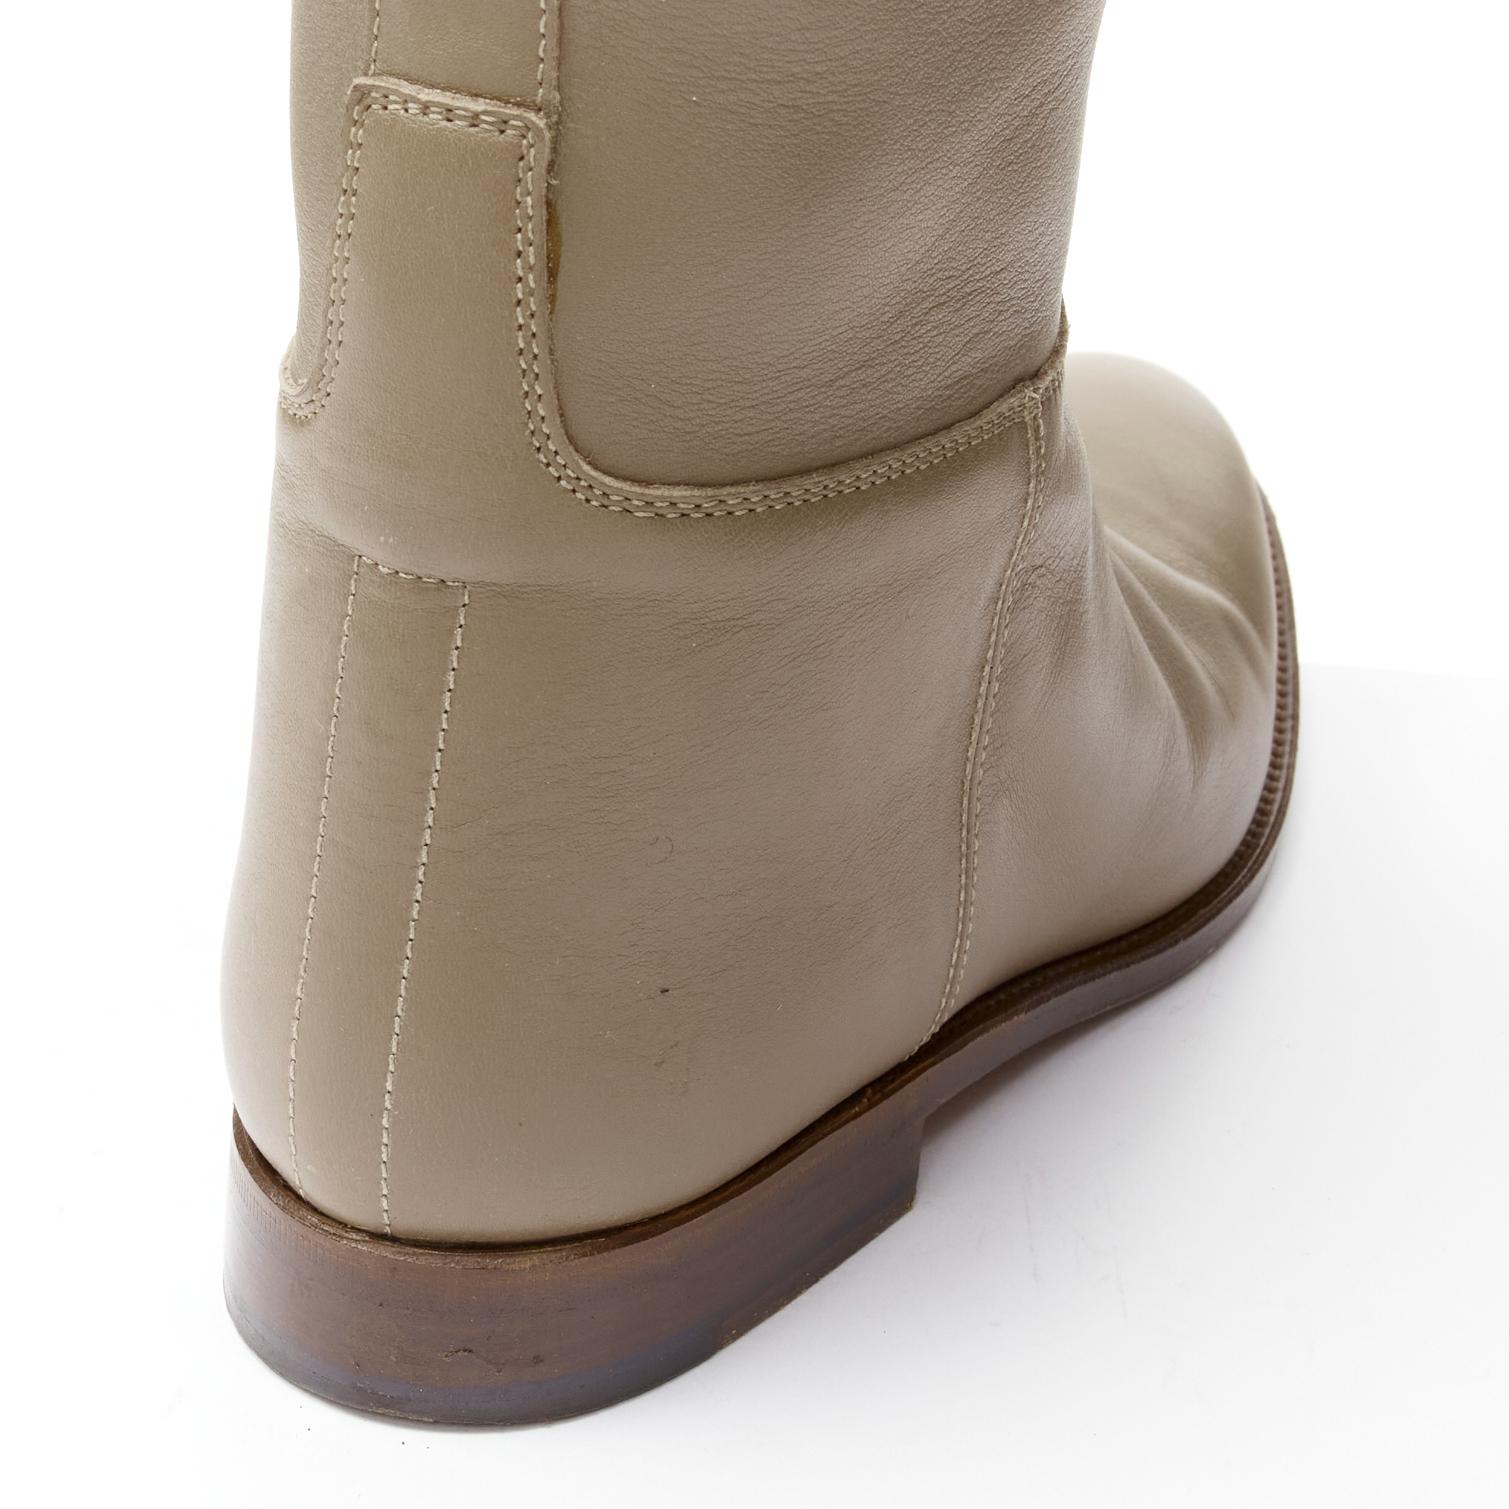 HERMES Kelly Jumping taupe brown PHW buckle riding boot EU37.5 For Sale 6